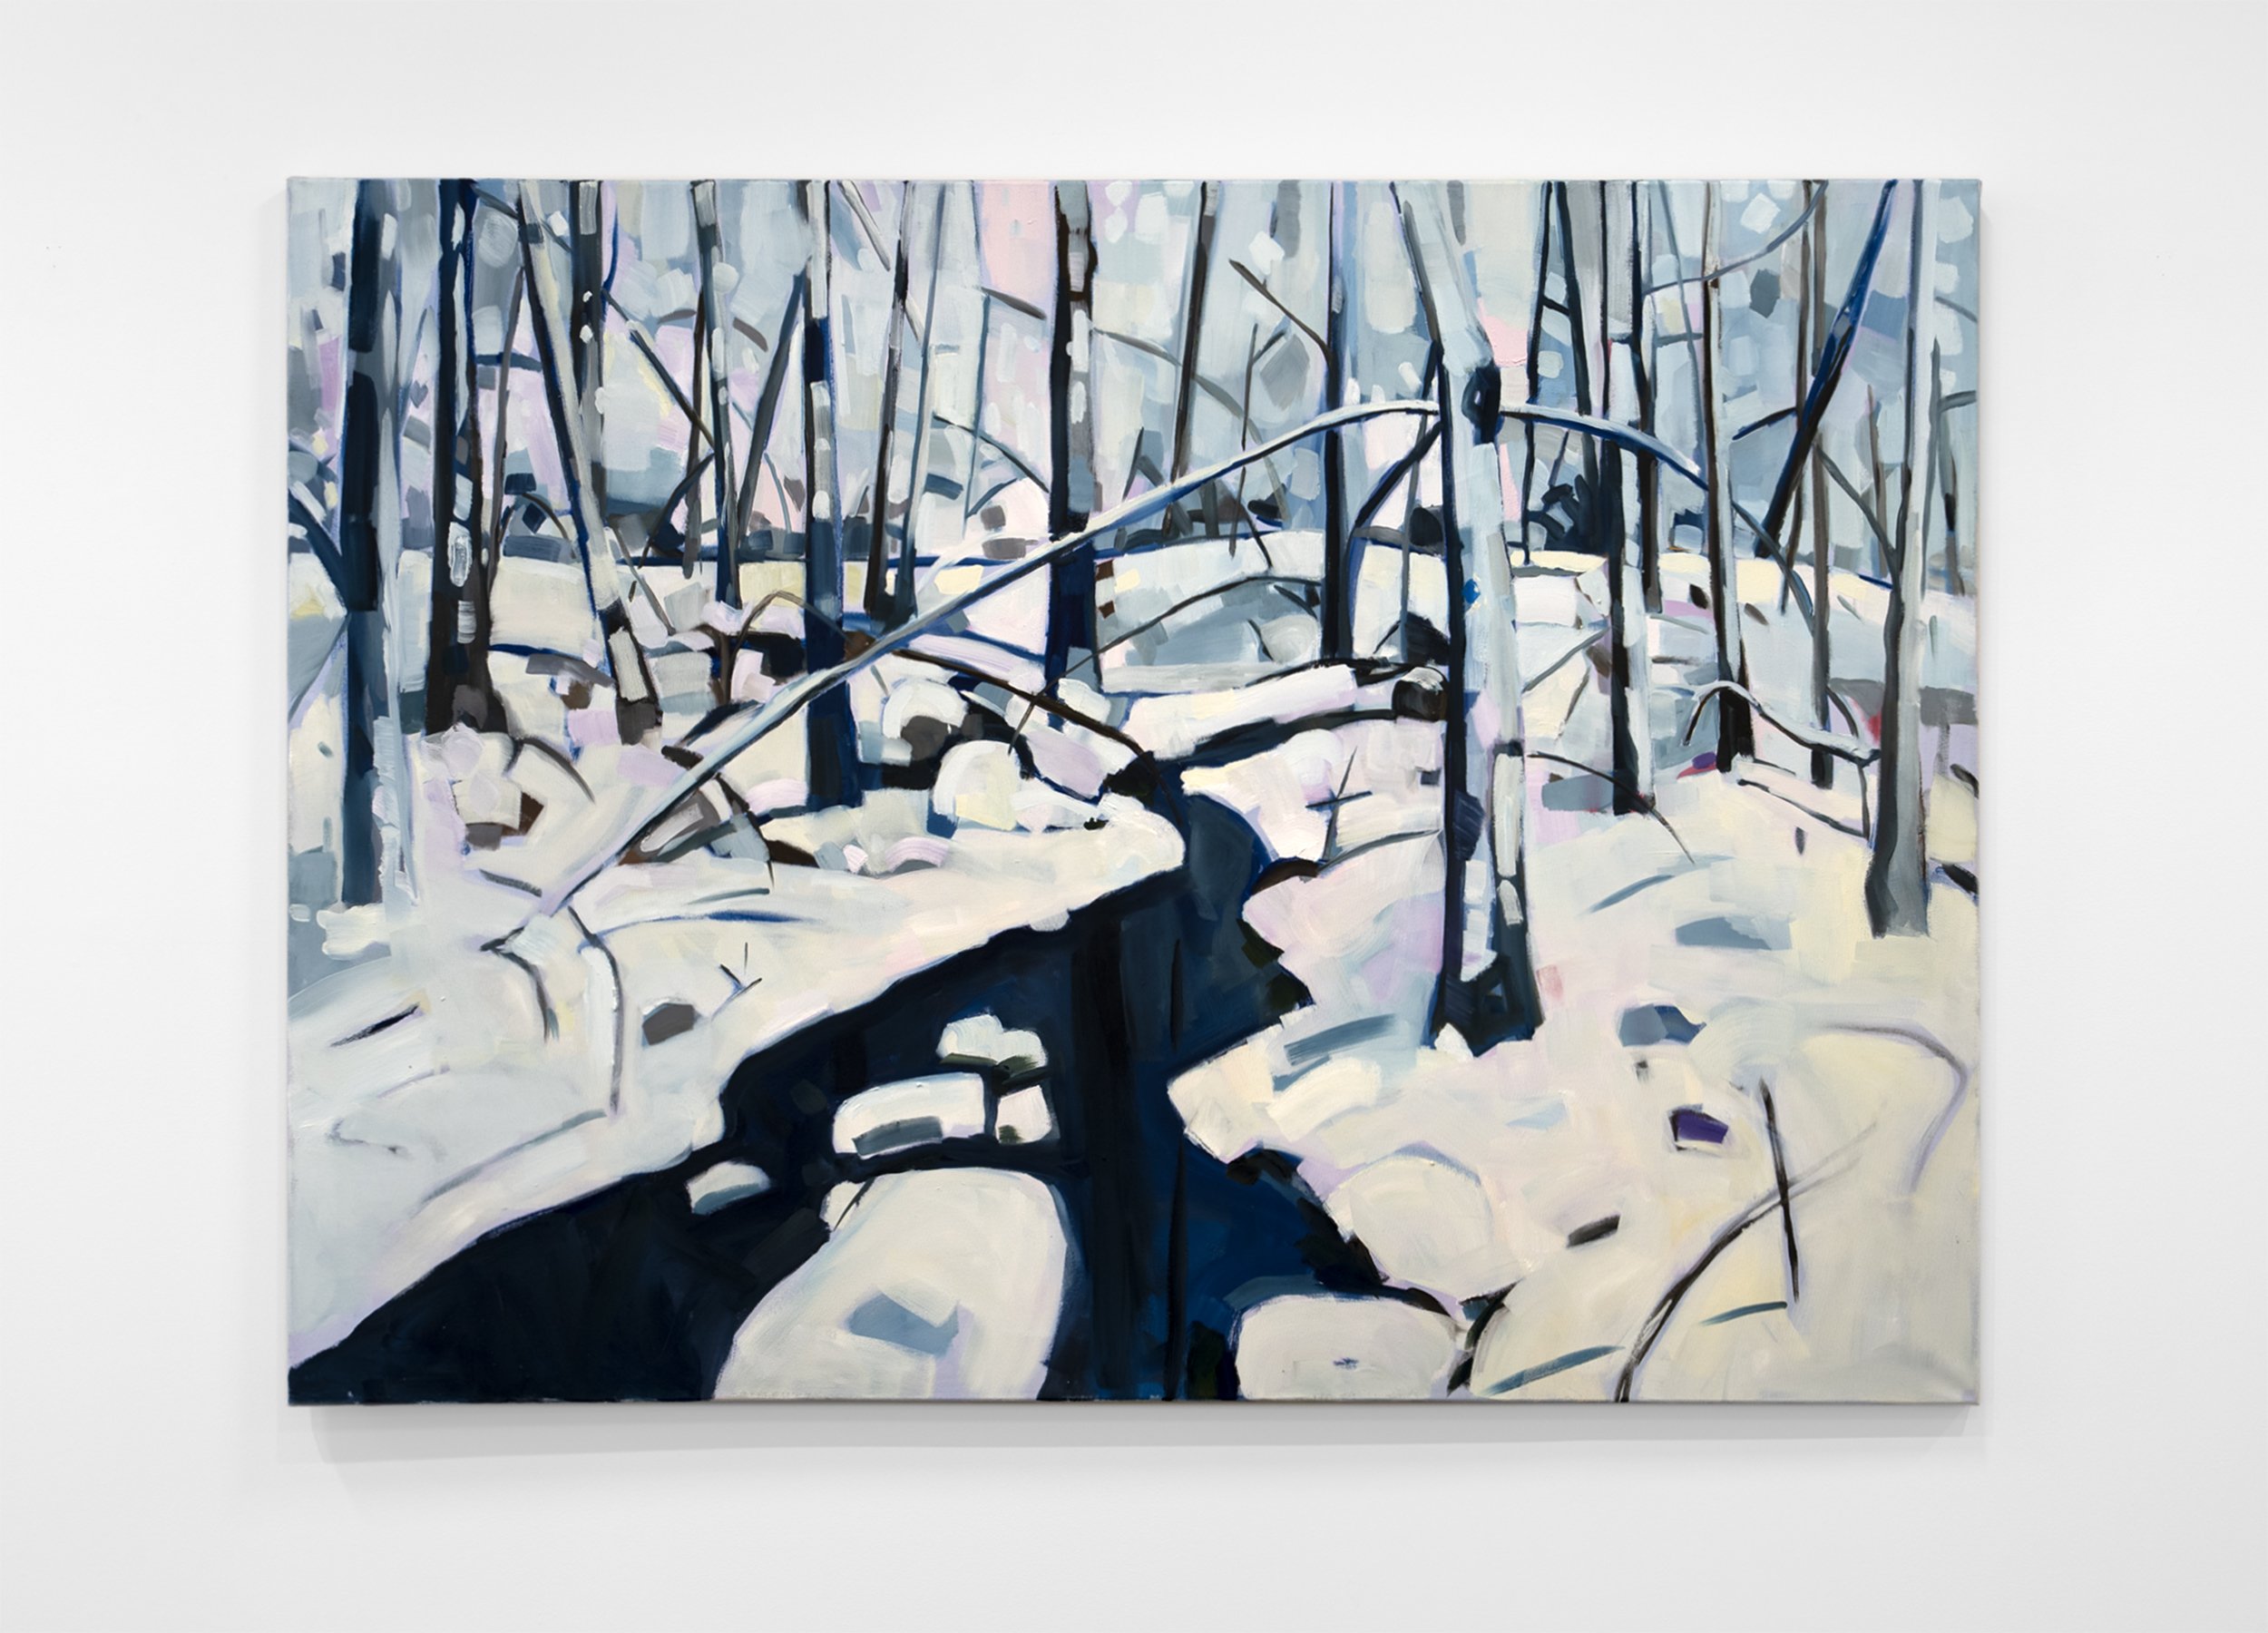   After the Storm (Trail Marker)  (2023)  Oil on canvas, 60” x 74”  $8,800 (sold) 